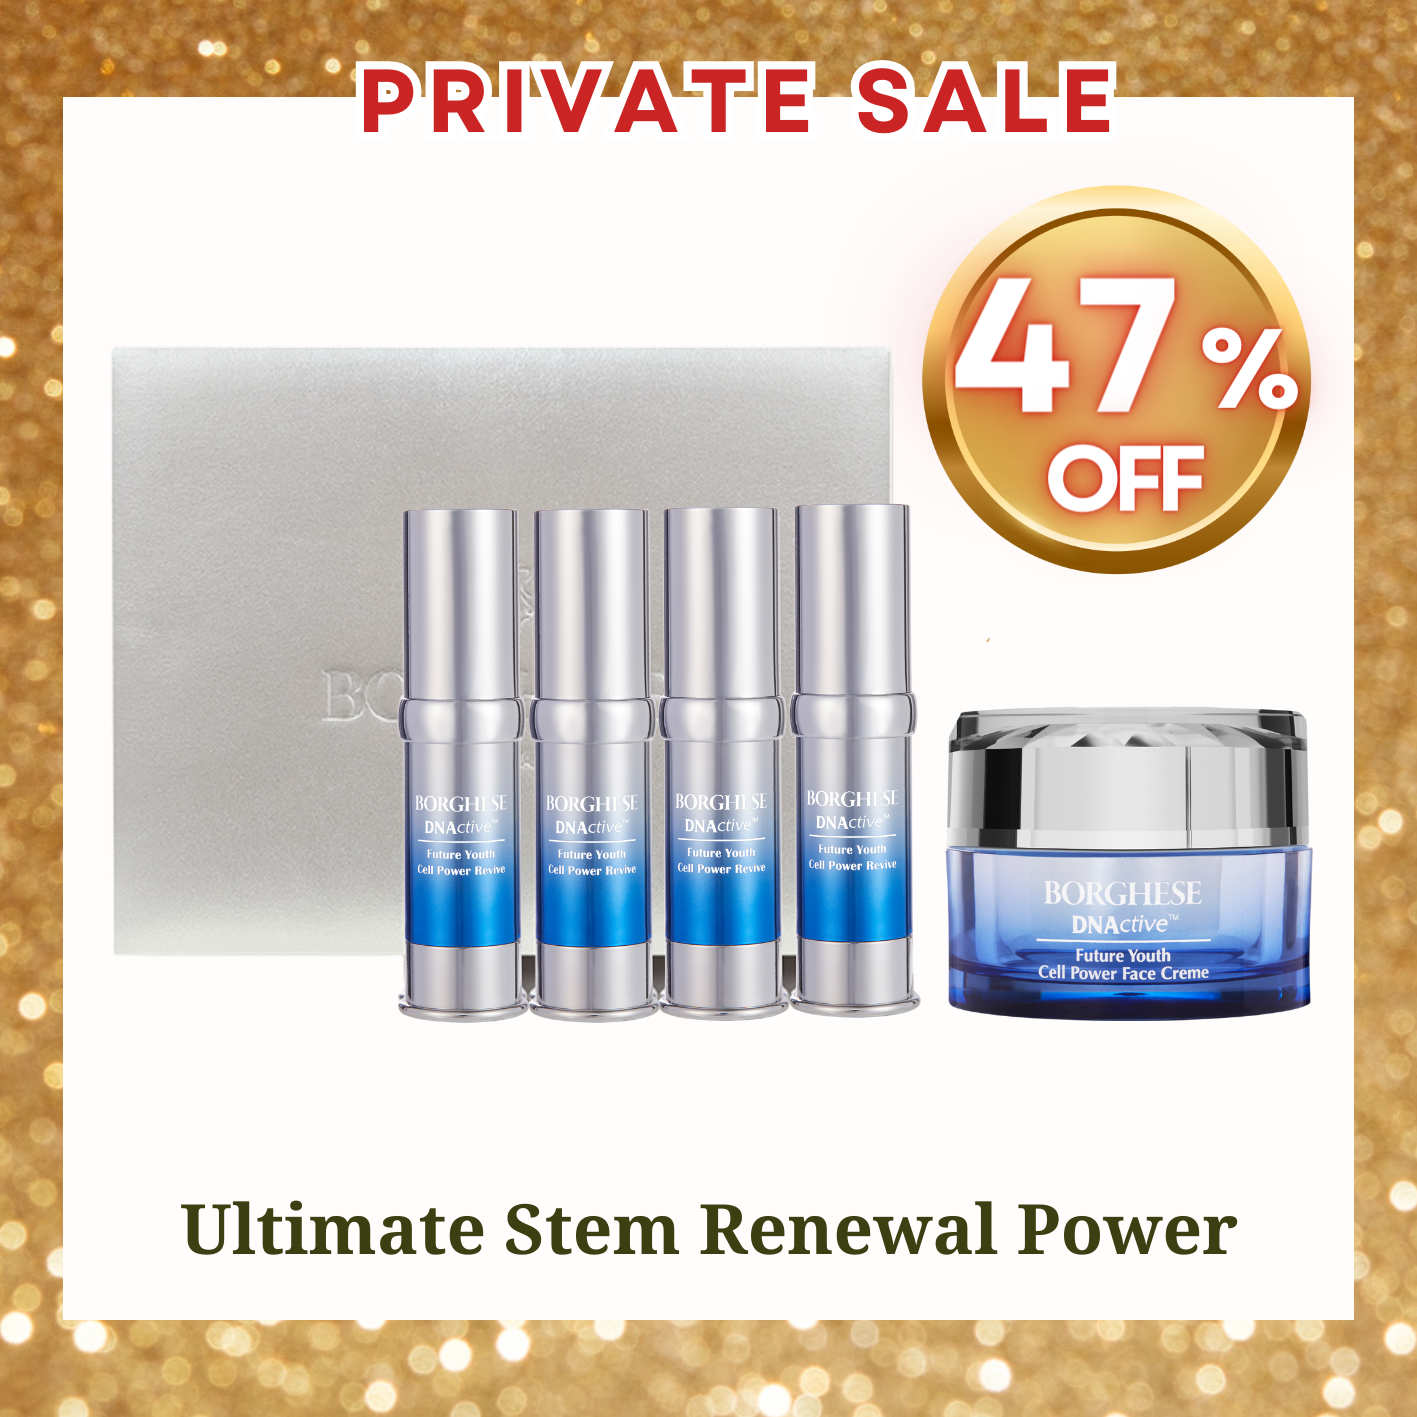 DNActive™ Future Youth Cell Power Revive & Cream Set